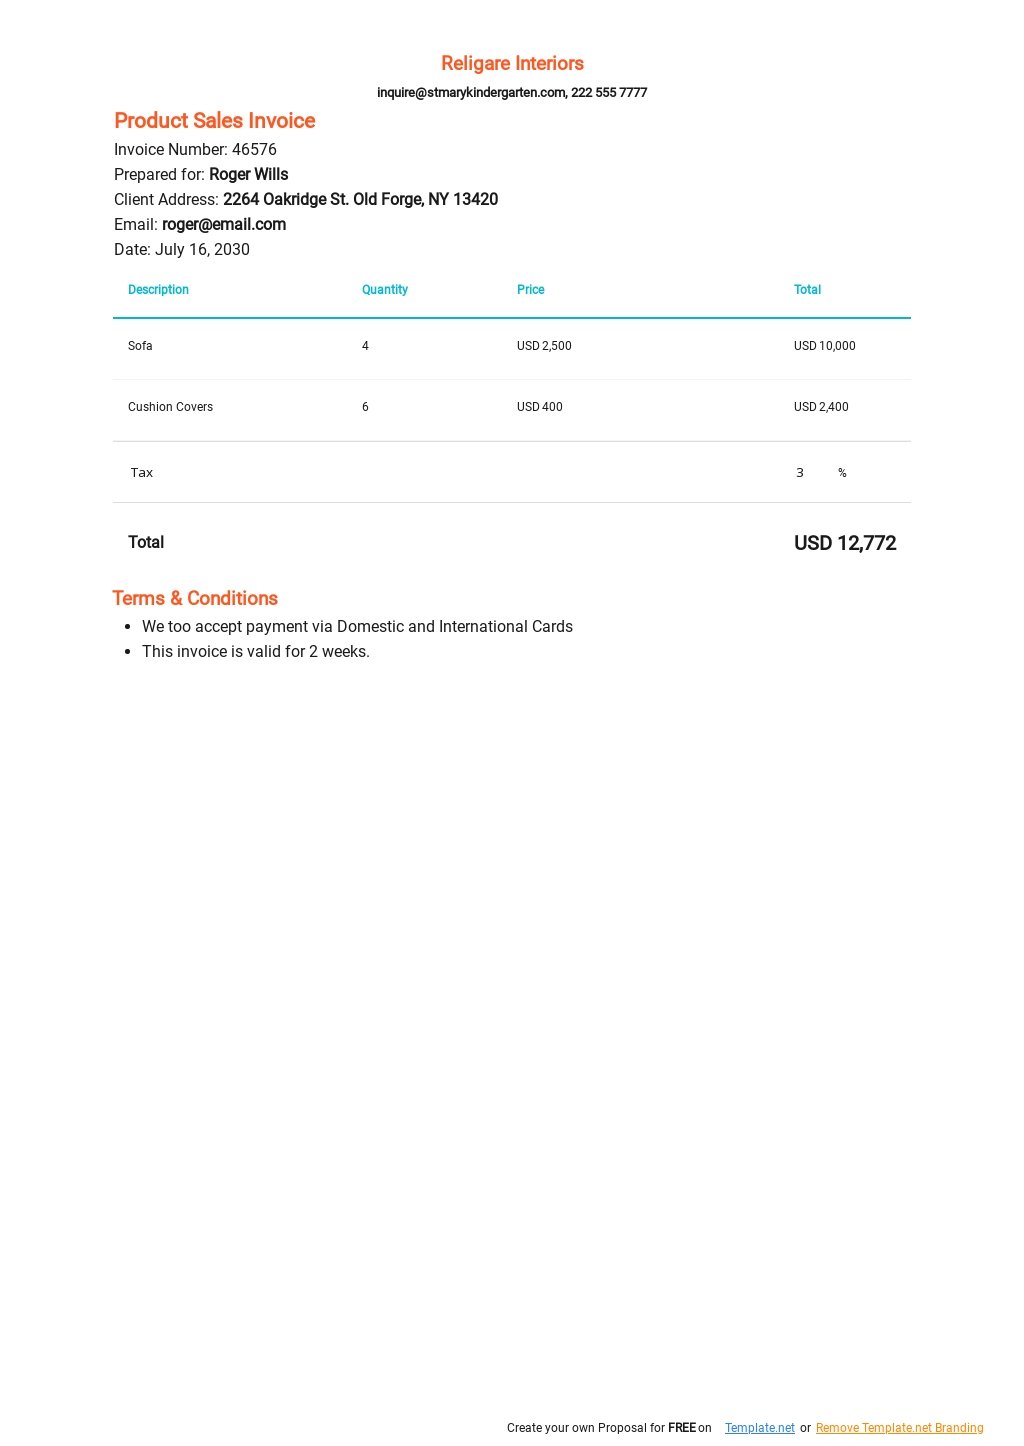 Product Sales Invoice Template.jpe